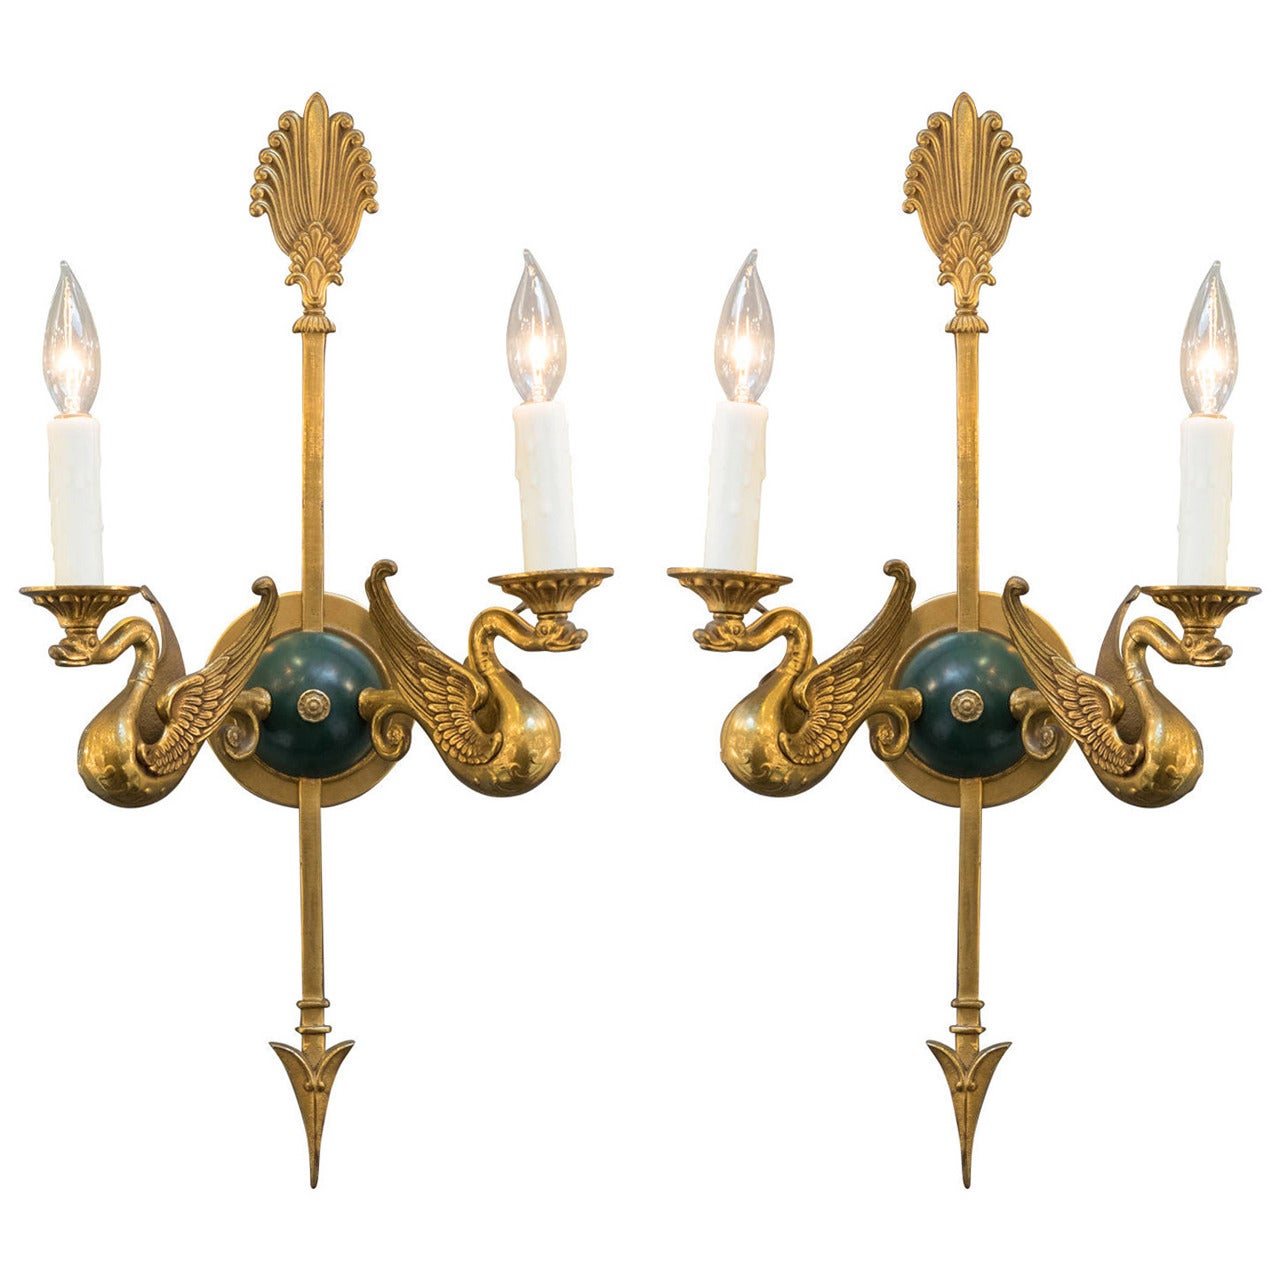 Magnificent Empire Bronze Swan Wall Sconces